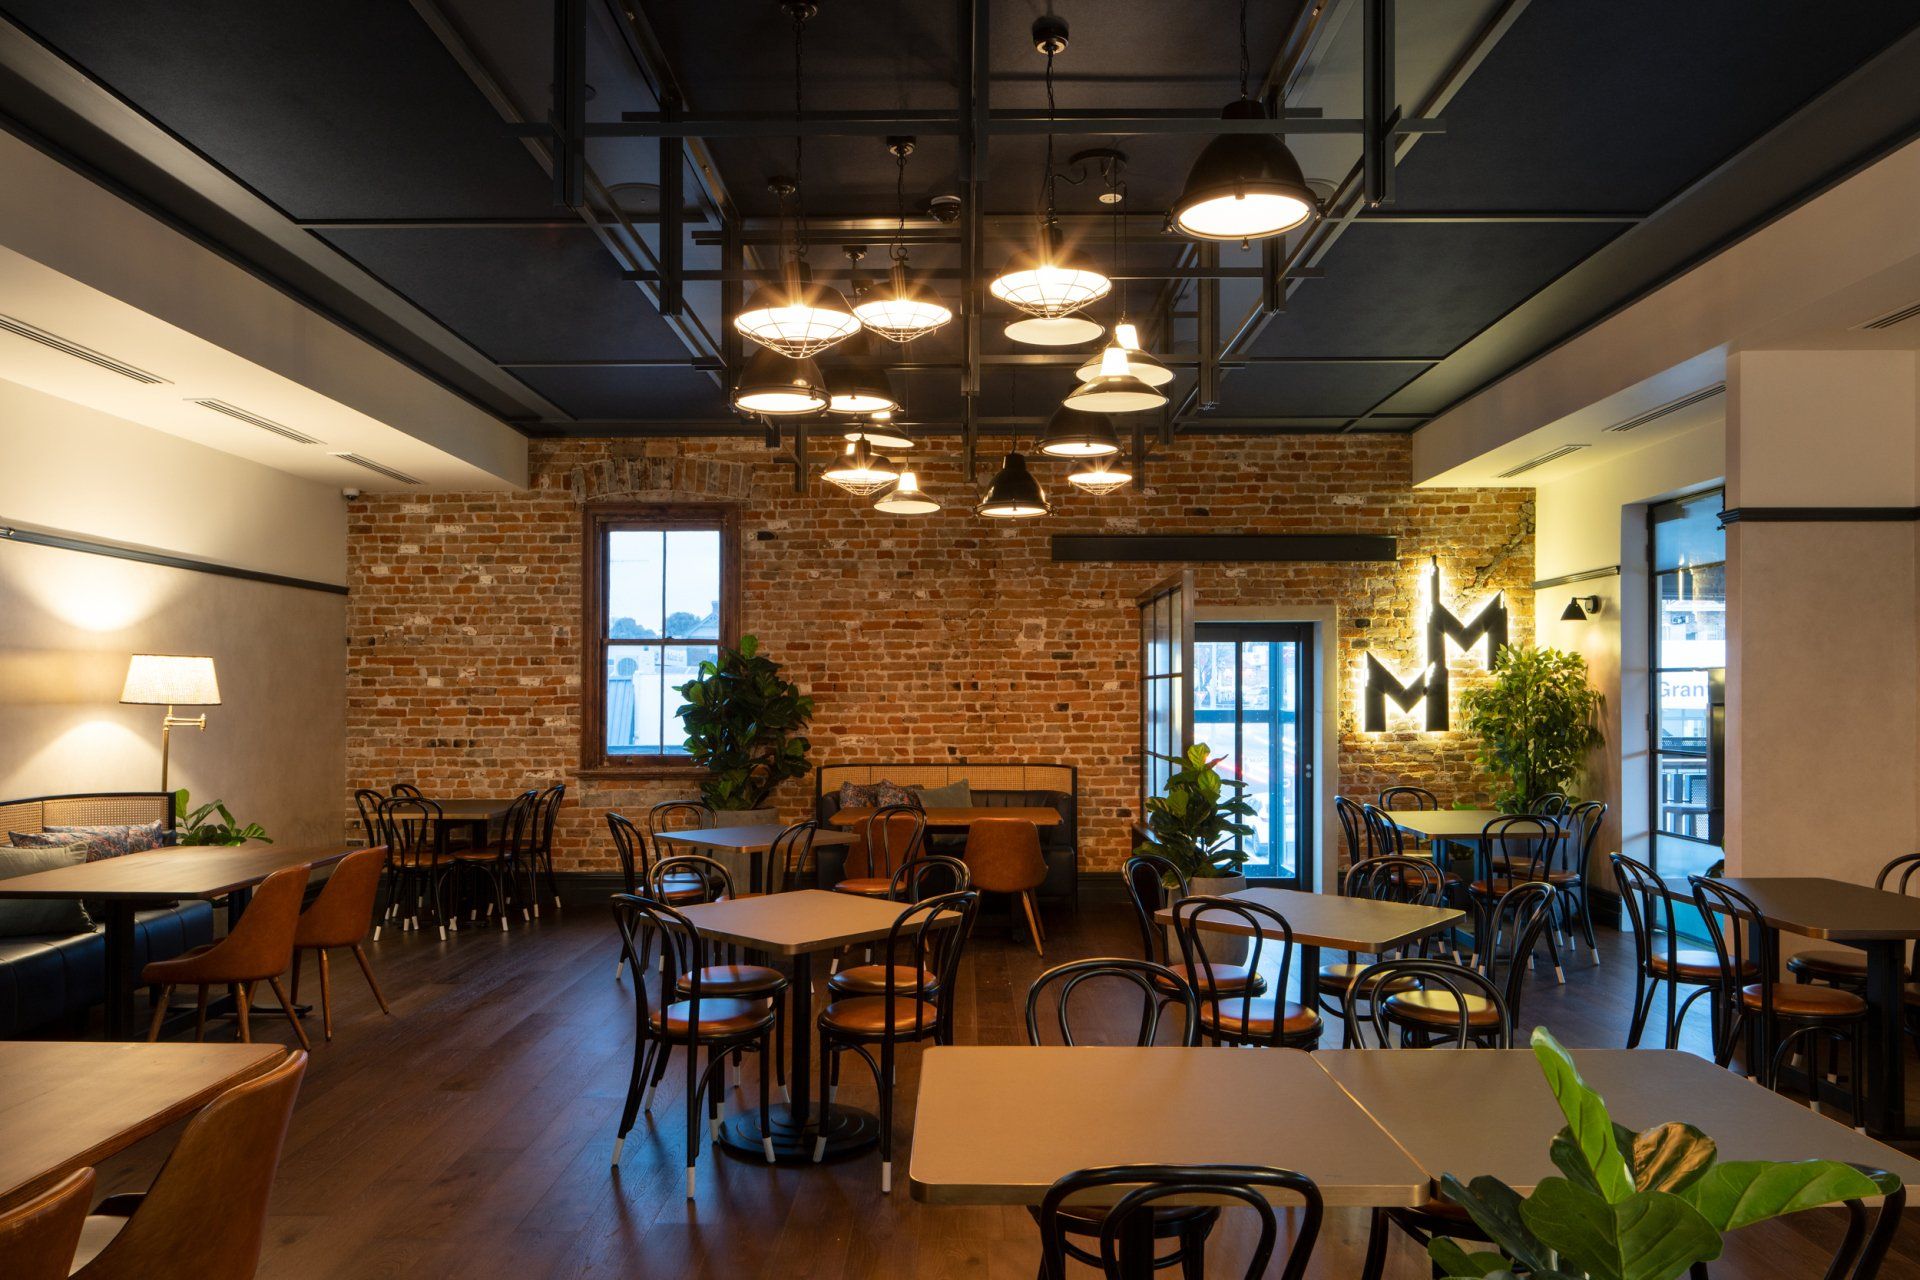 a restaurant dining room at whitebull hotel with tables and chairs and a brick wall .